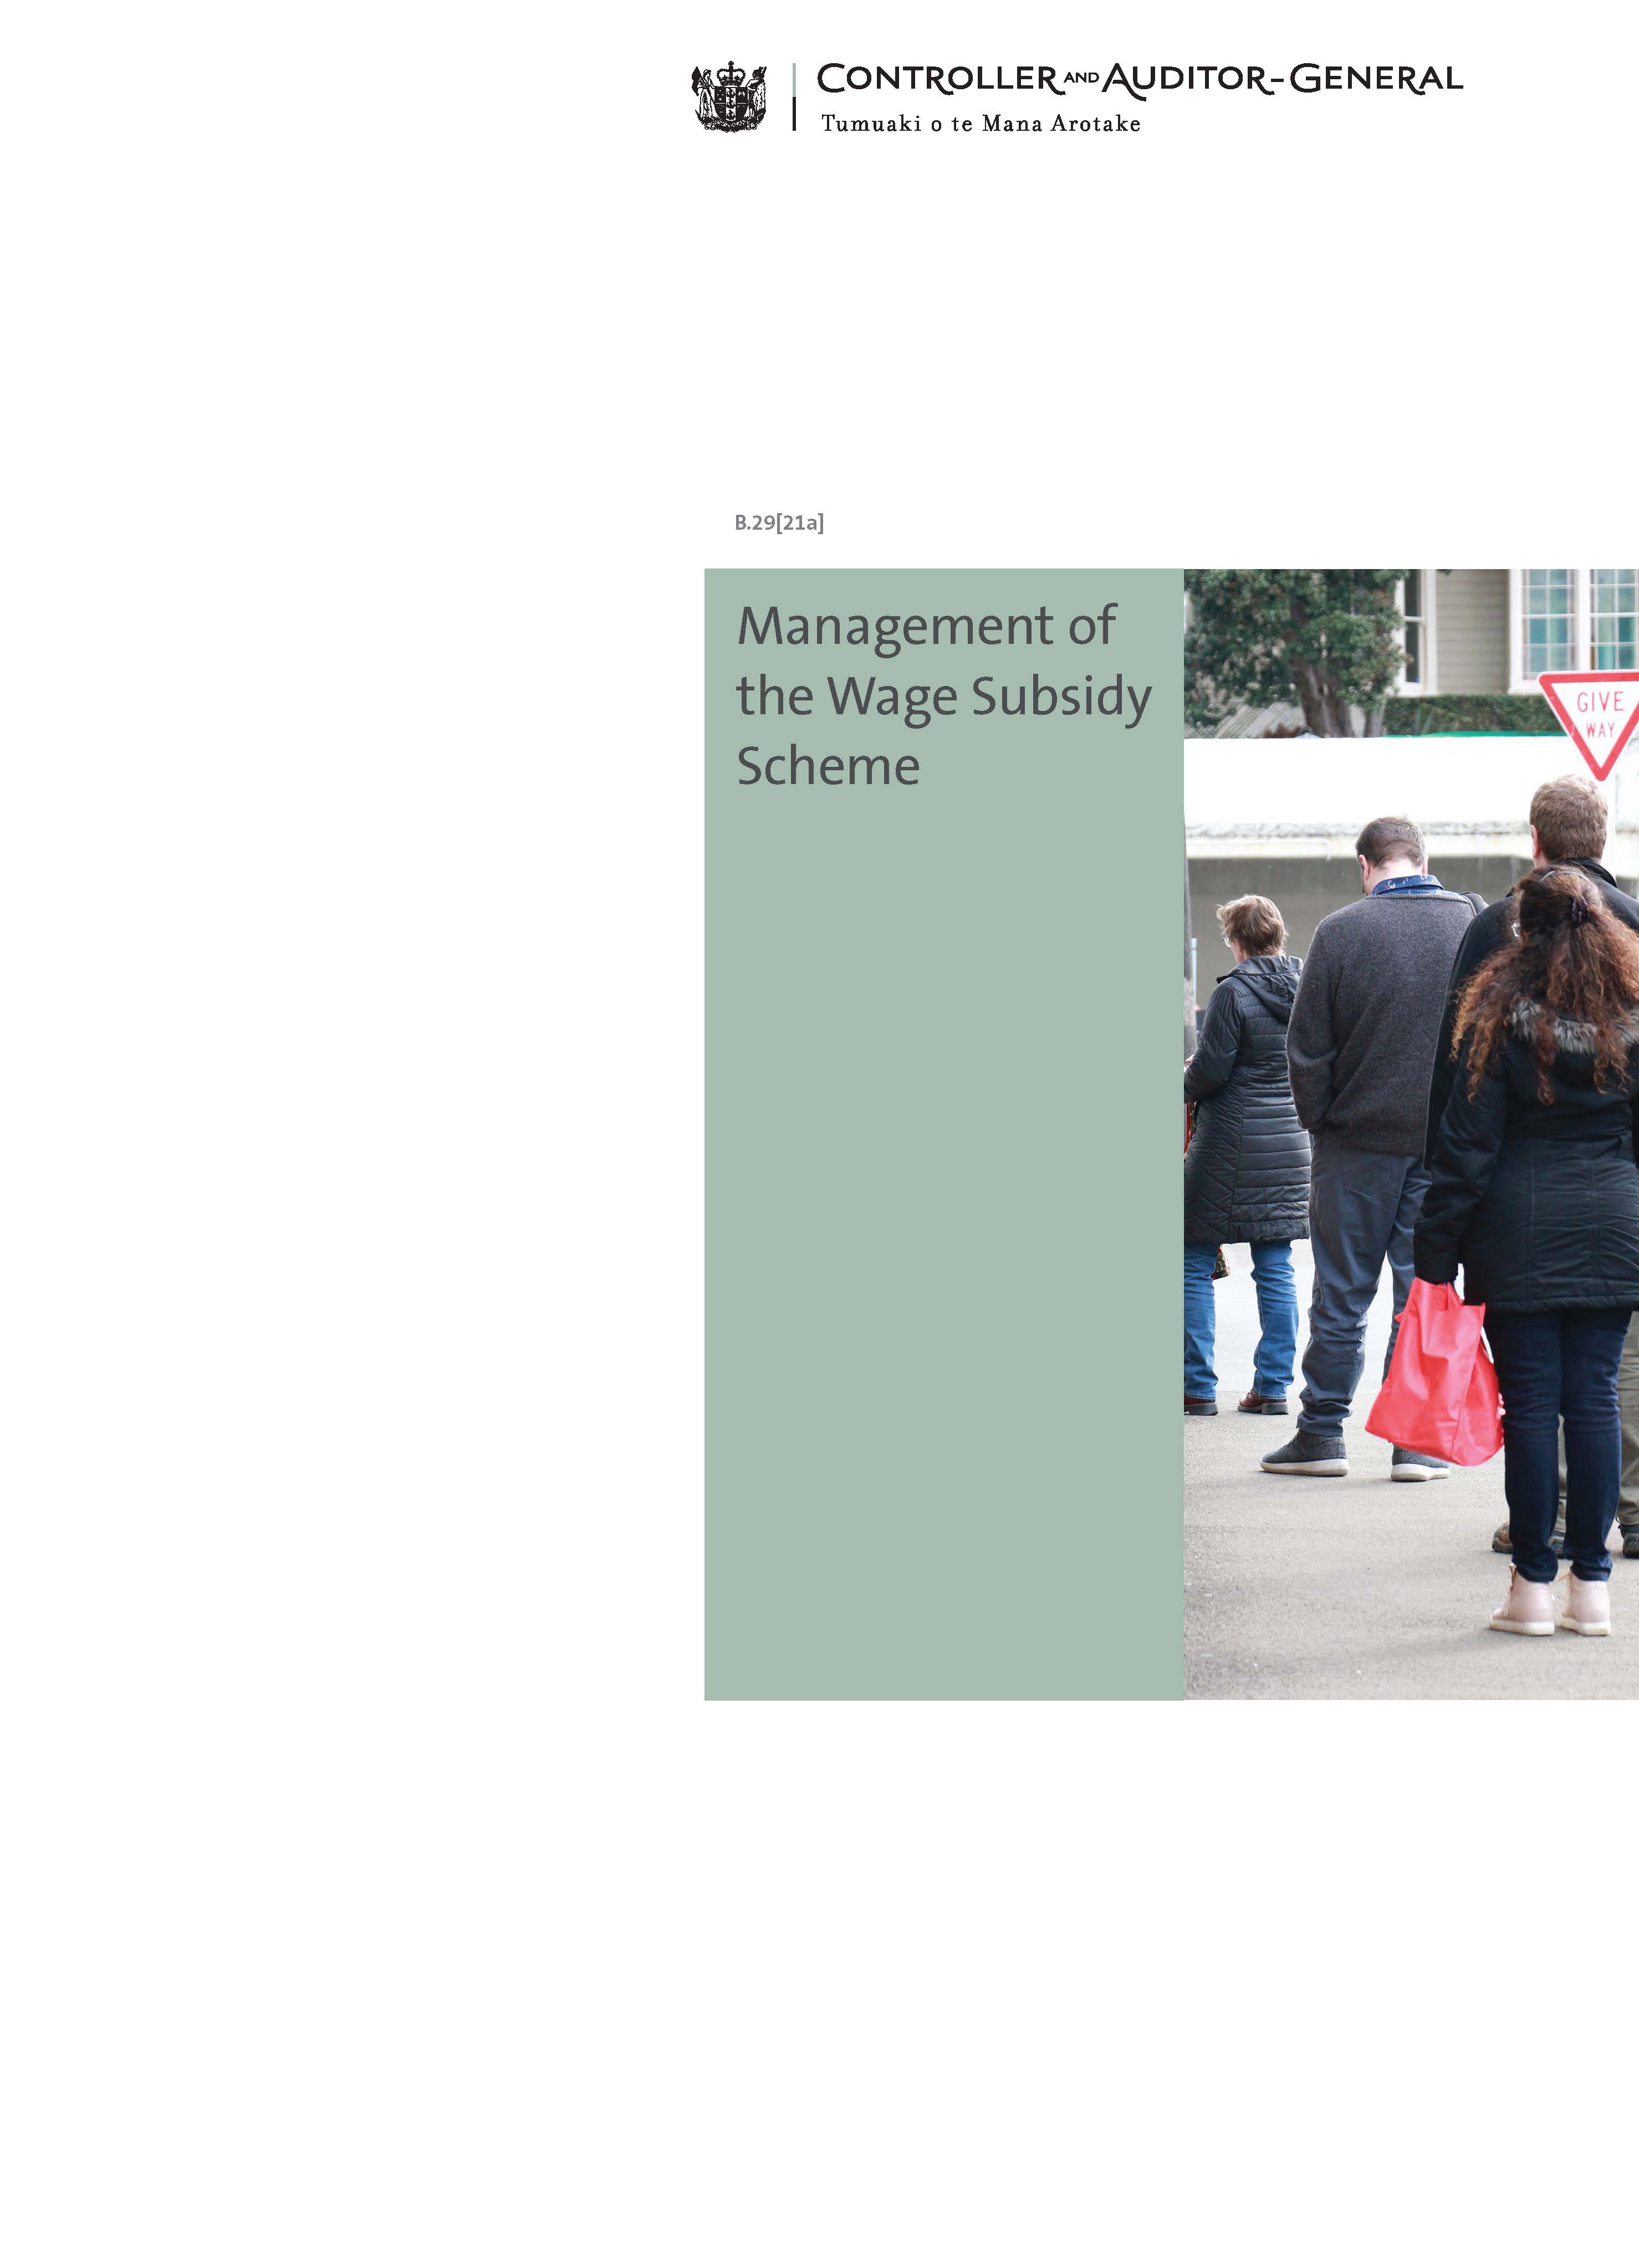 Management of the Wage Subsidy Scheme report cover